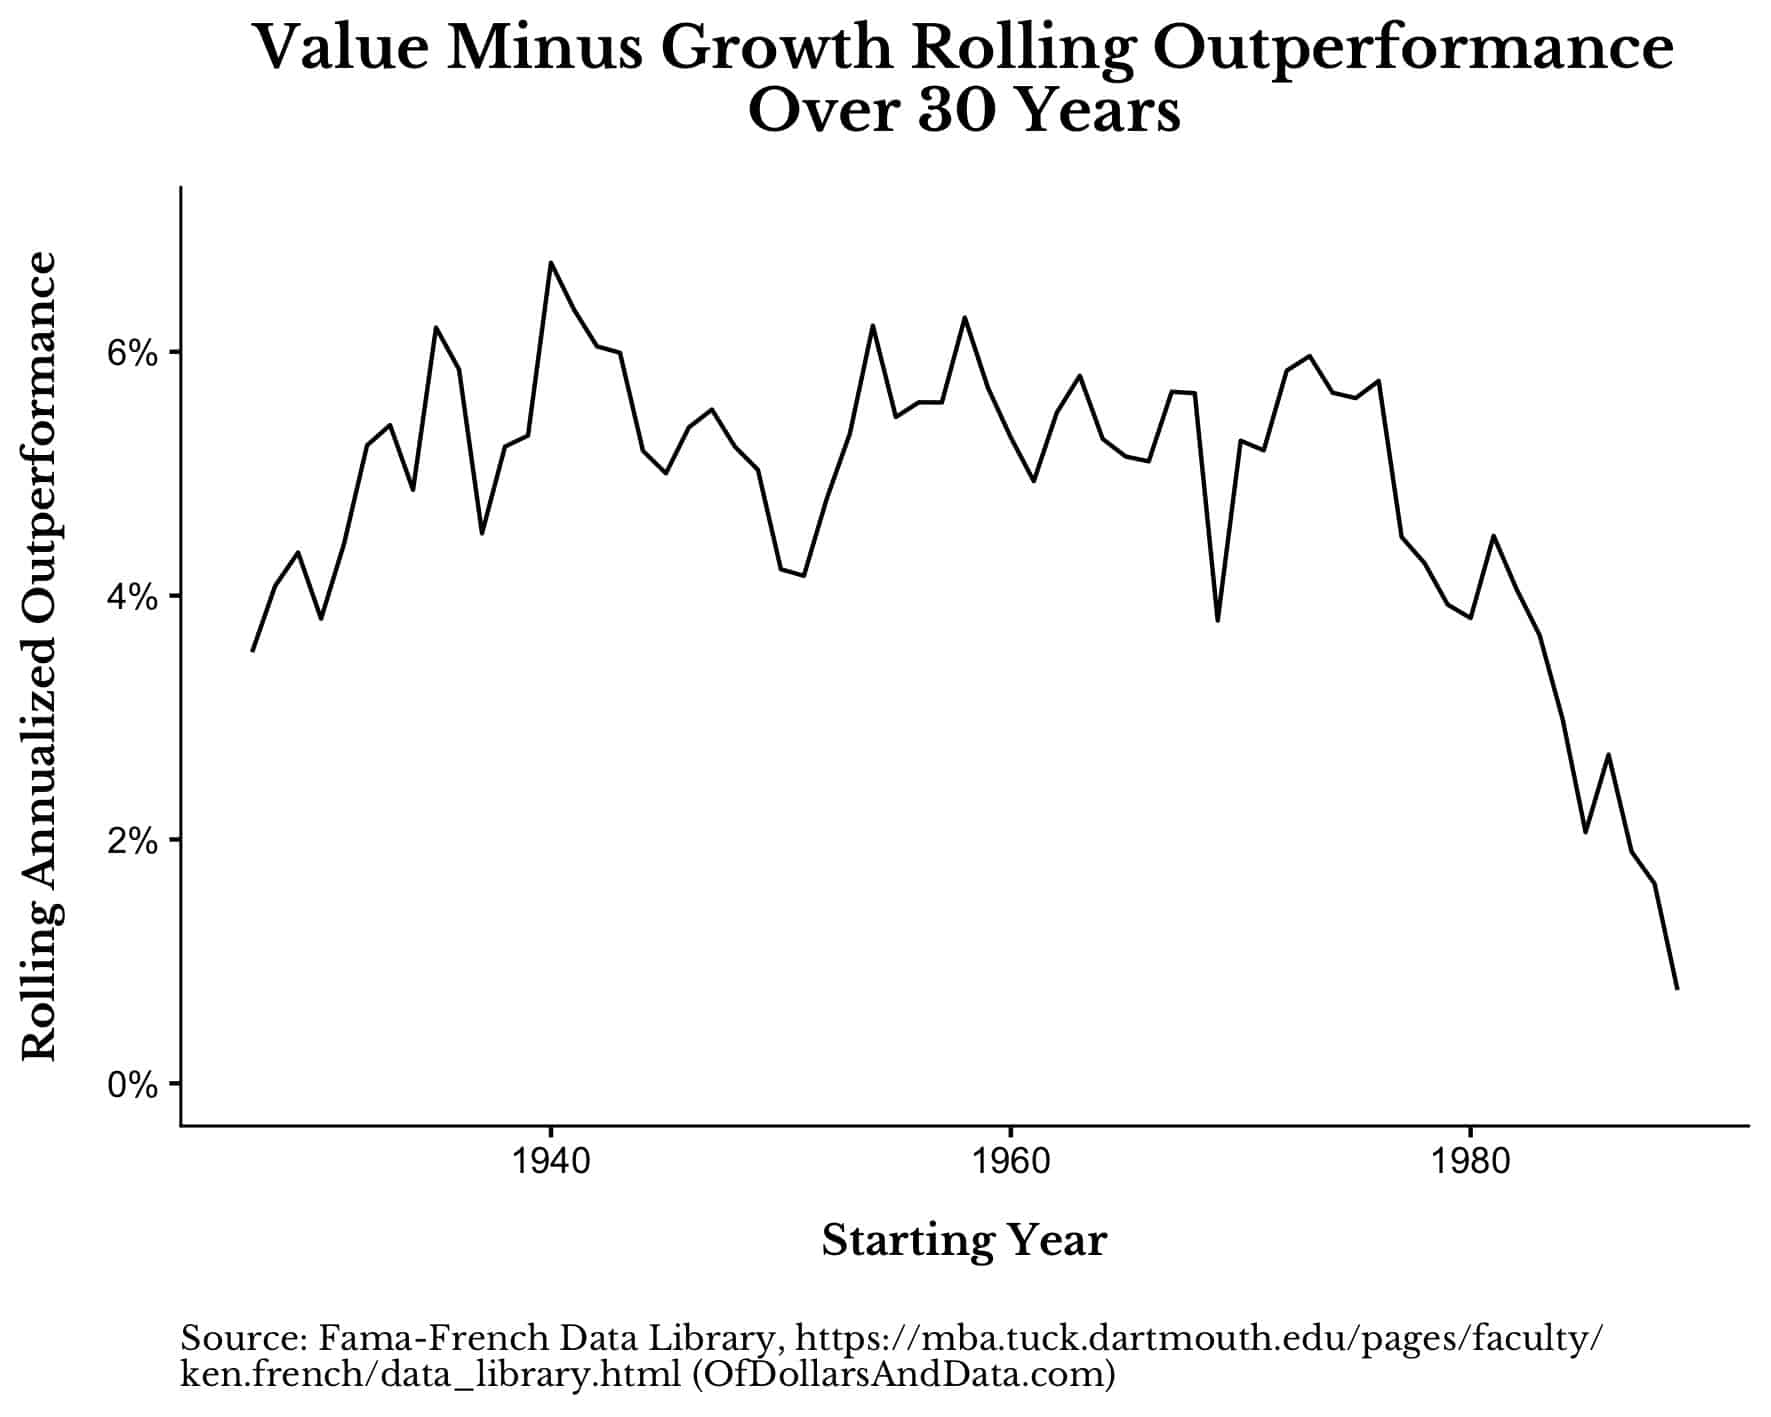 Value minus growth rolling outperformance over 30 years